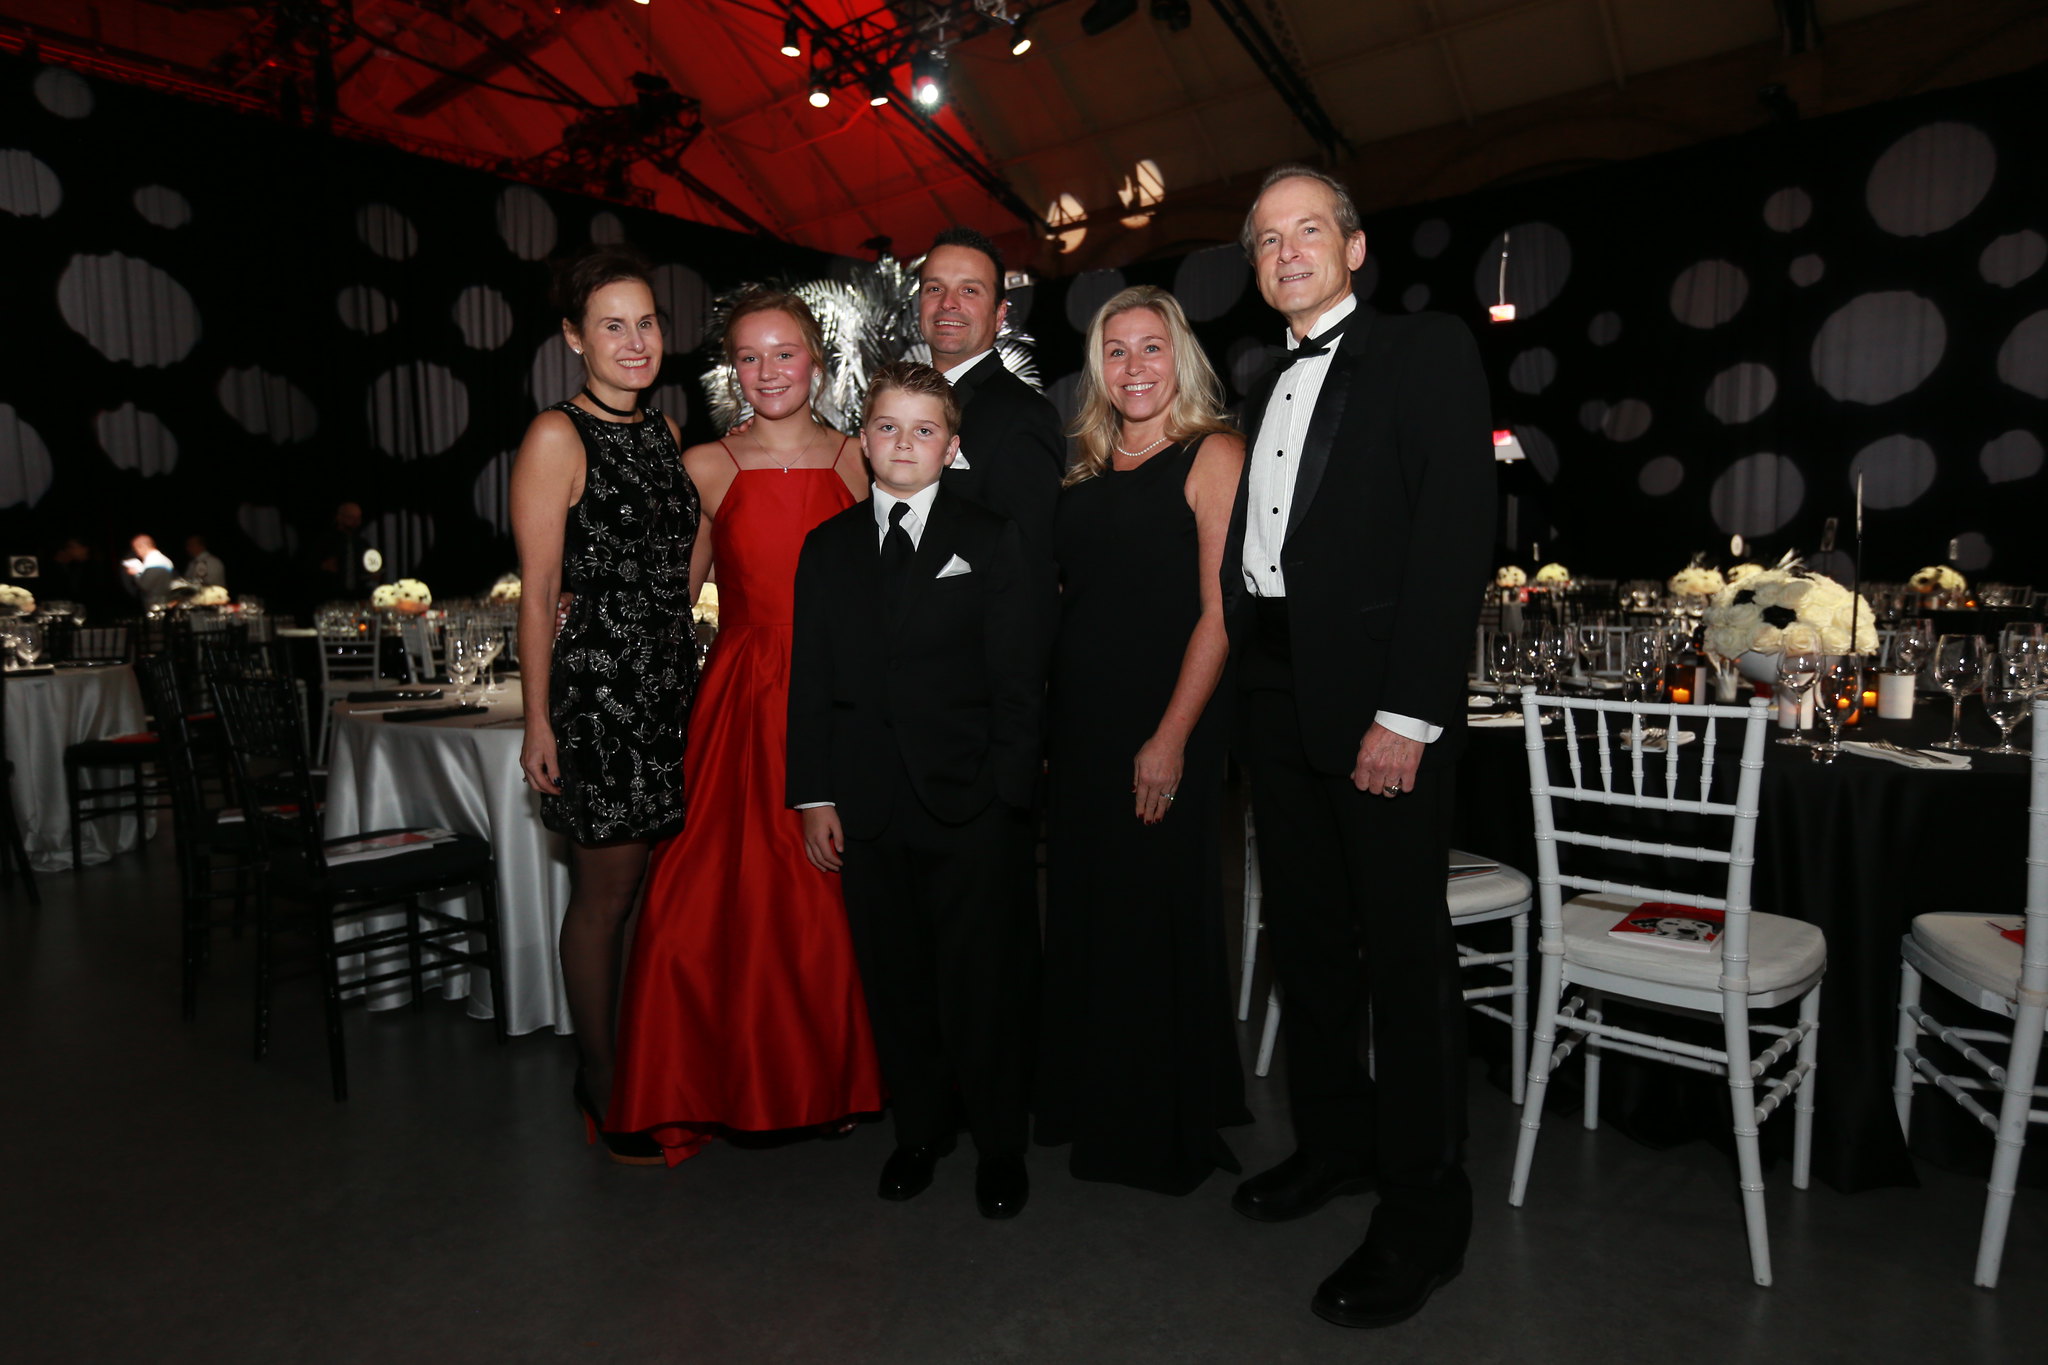 Storybook Ball 2018_Rehm family with Dr Janet Wozniak and Dr Timothy Willens_W2ST9450